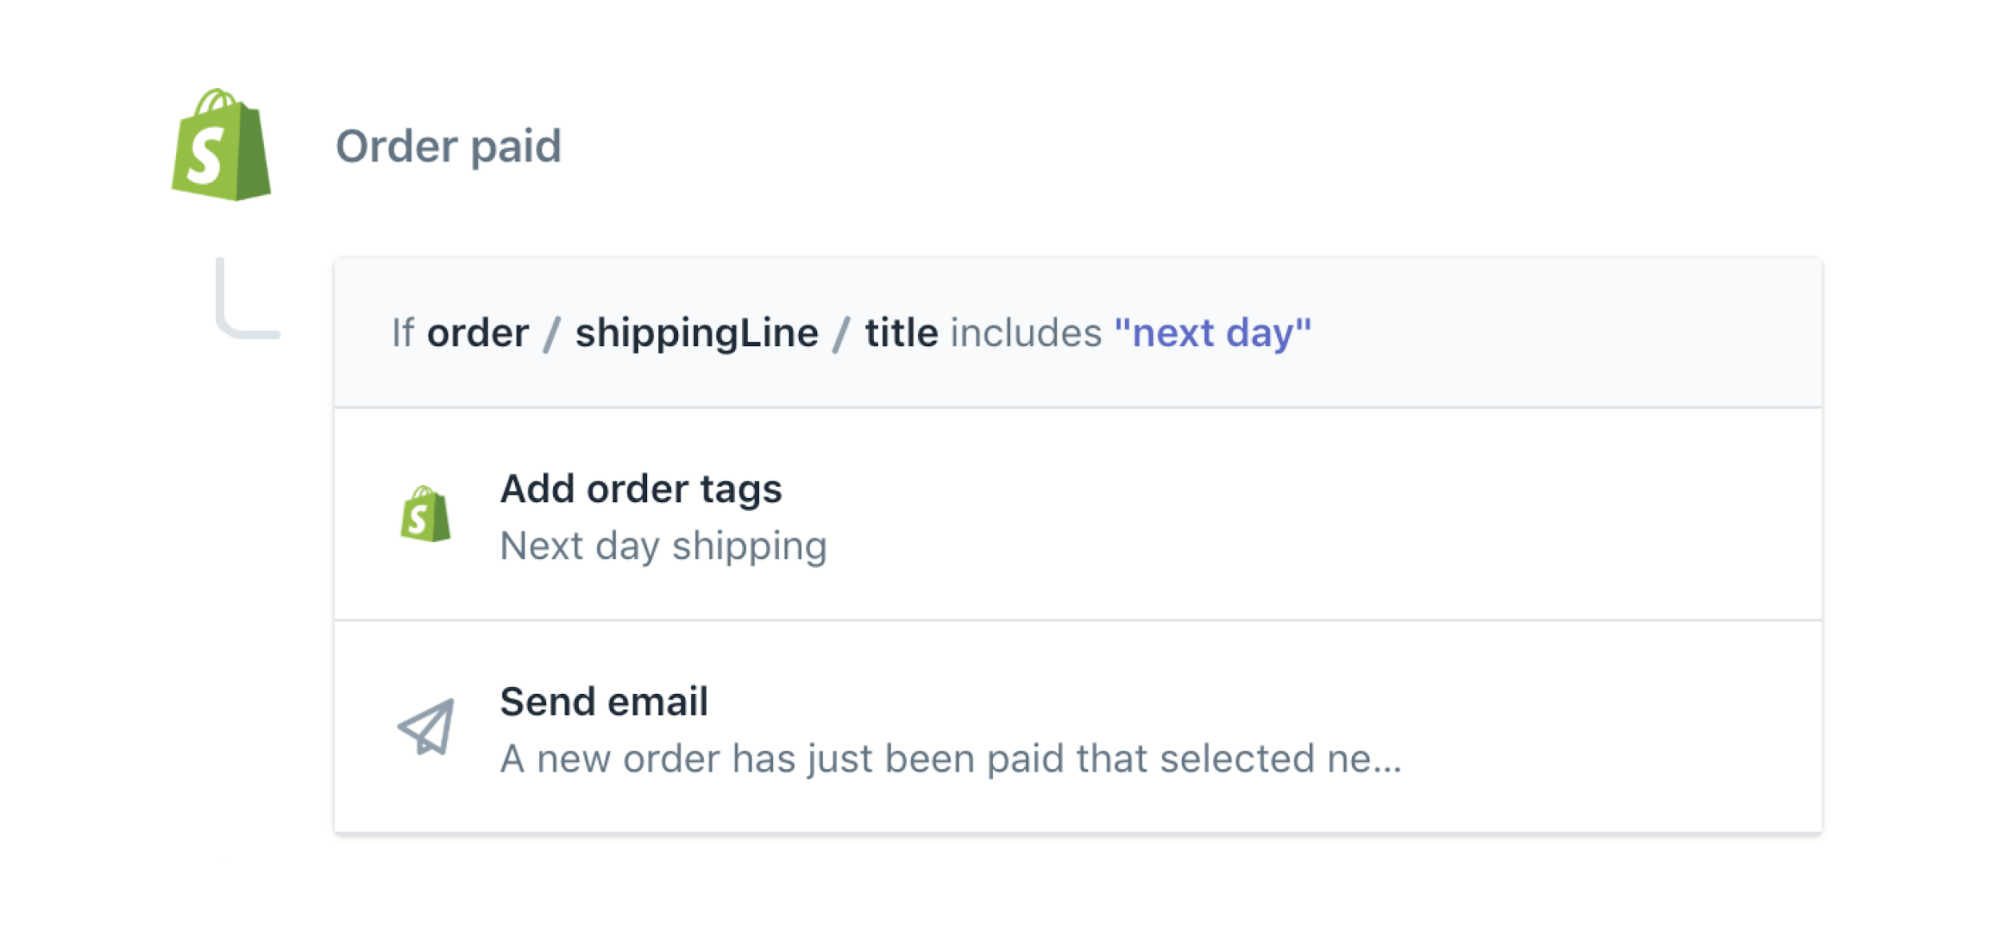 Expedited order ecommerce automation template to email logistics team